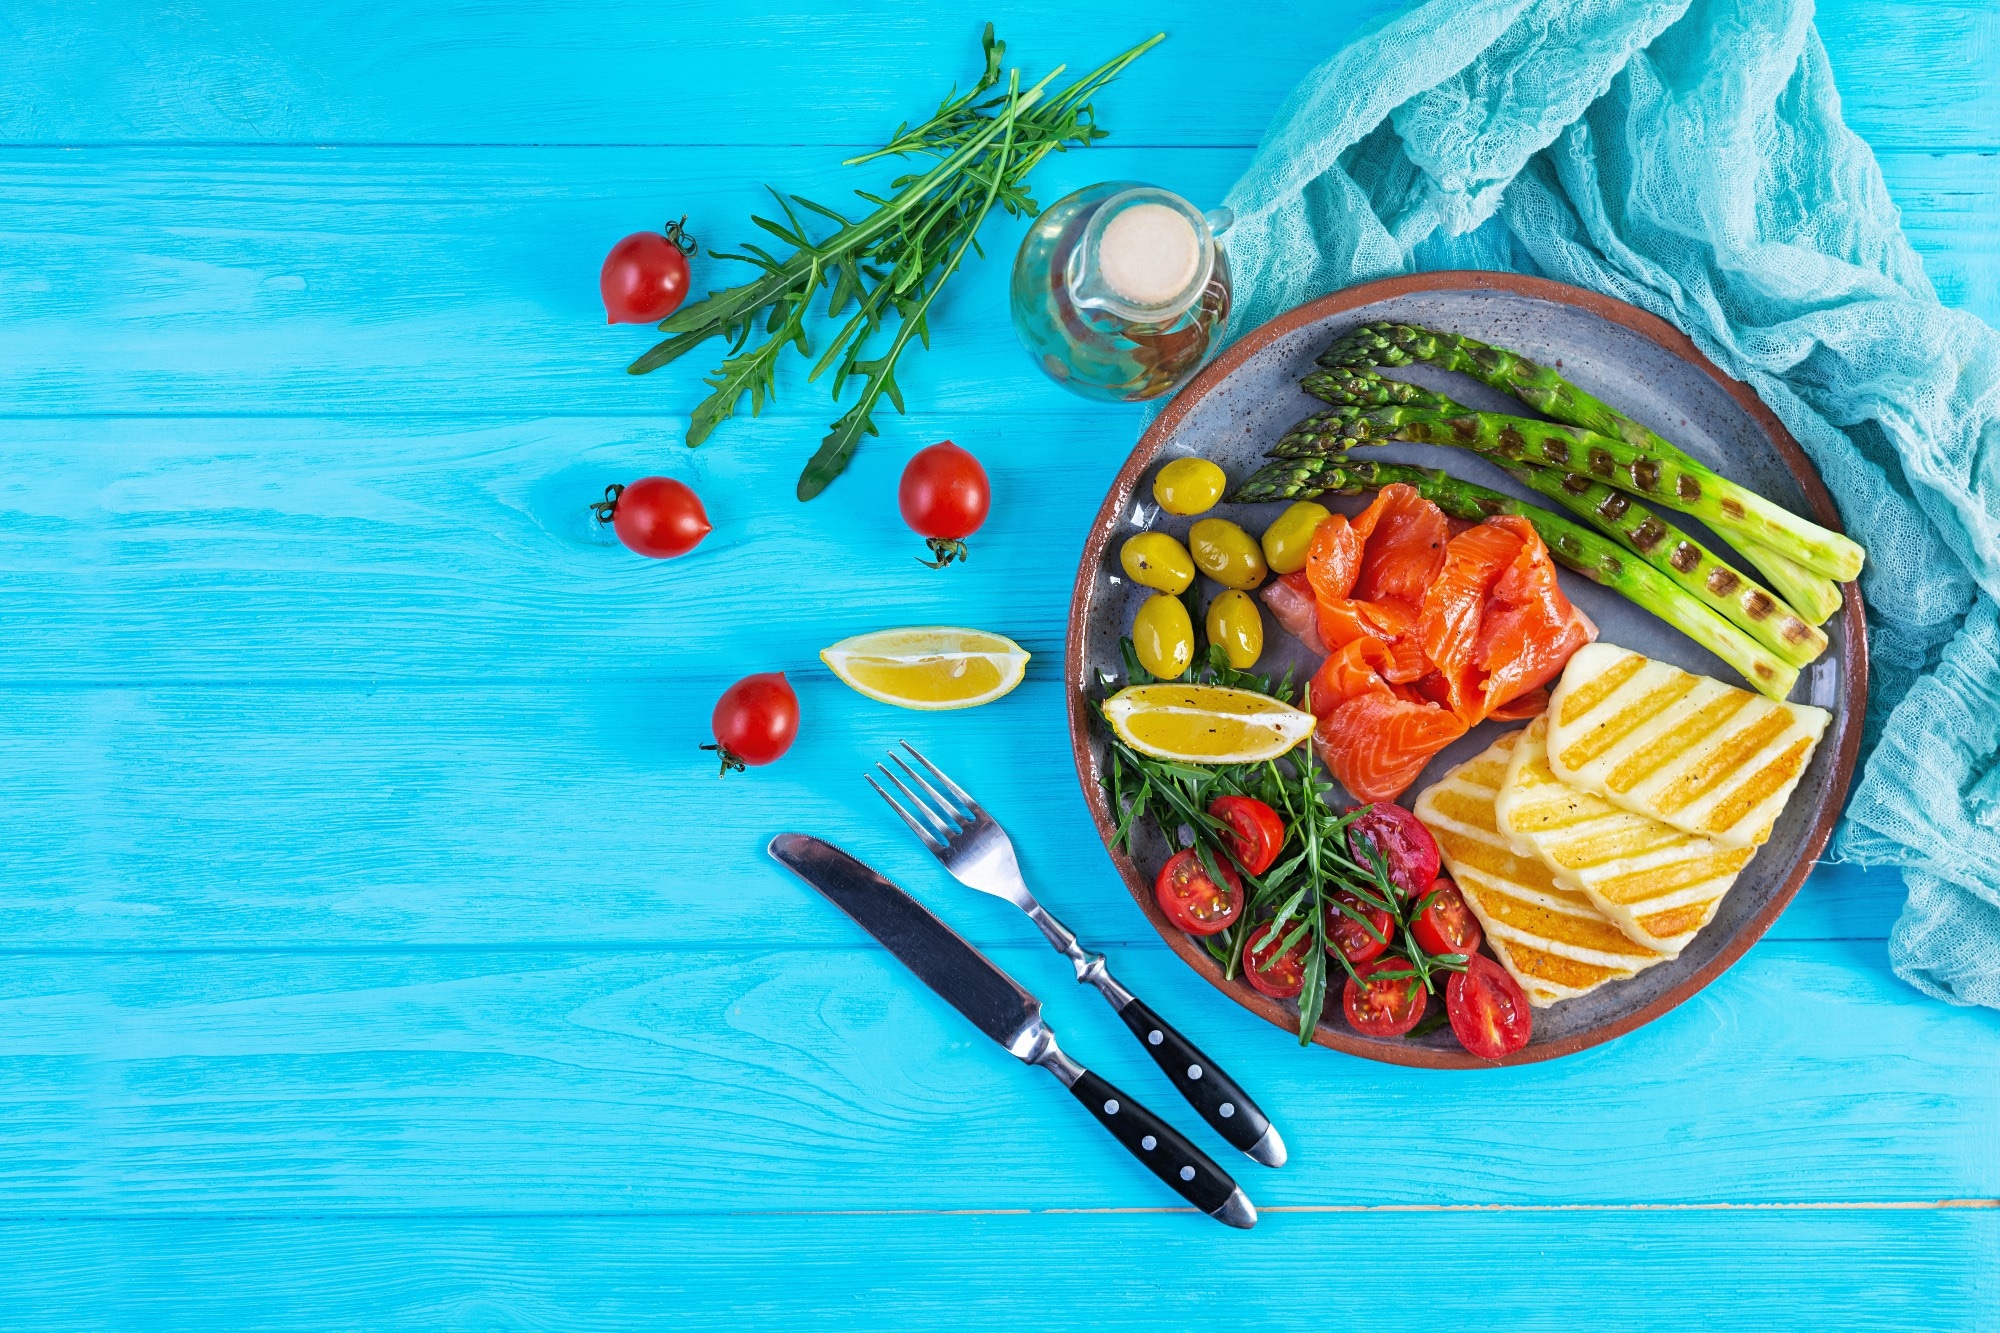 Study: Effects of the low-carb organic Mediterranean diet on testosterone levels and sperm DNA fragmentation. Image Credit: Aeril / Shutterstock